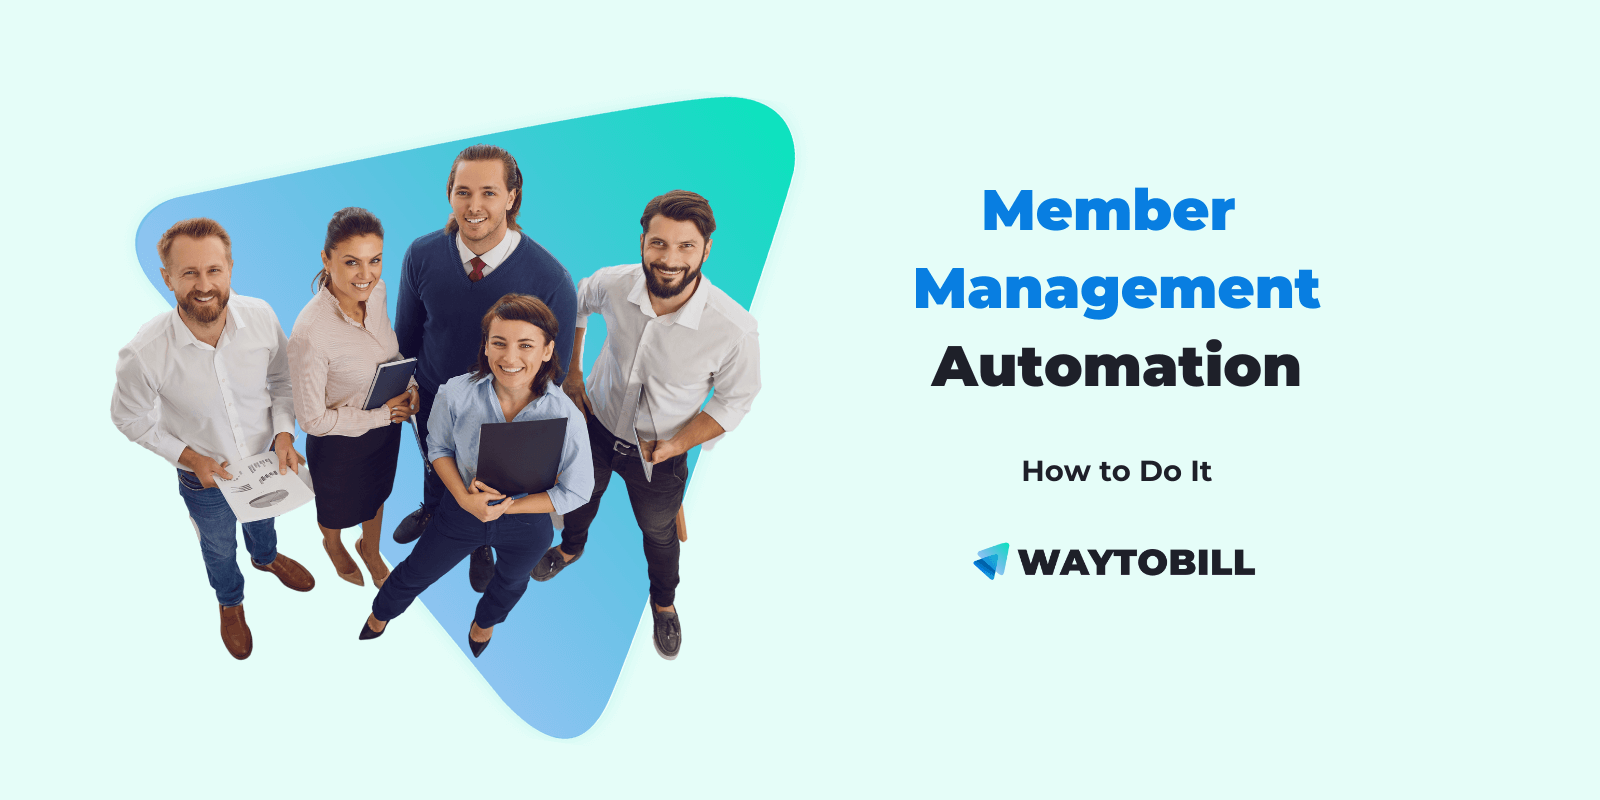 How to Automate Member Management in Membership Organisations